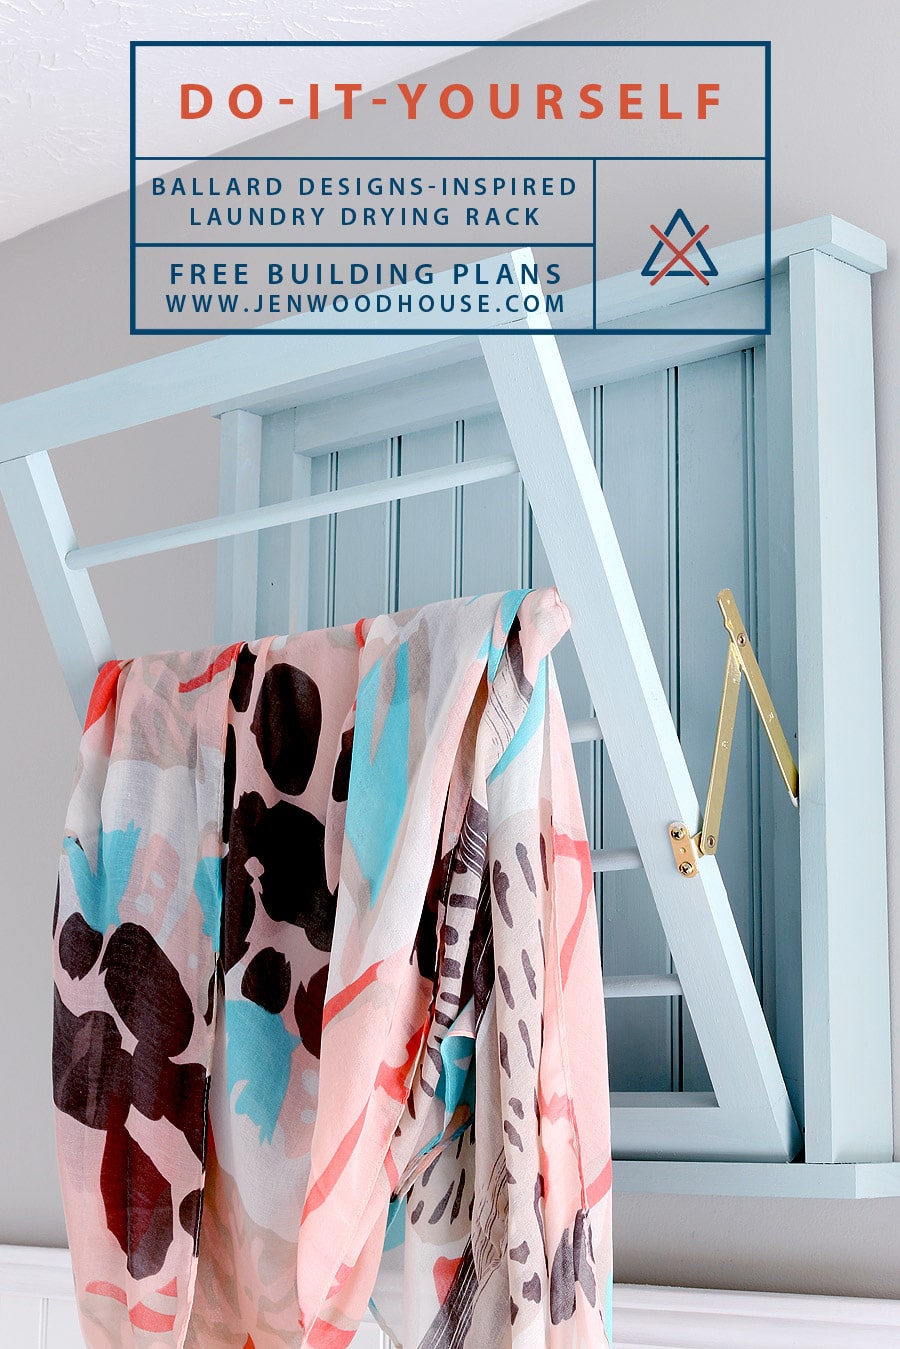 How to build a DIY laundry rack inspired by Ballard Designs.